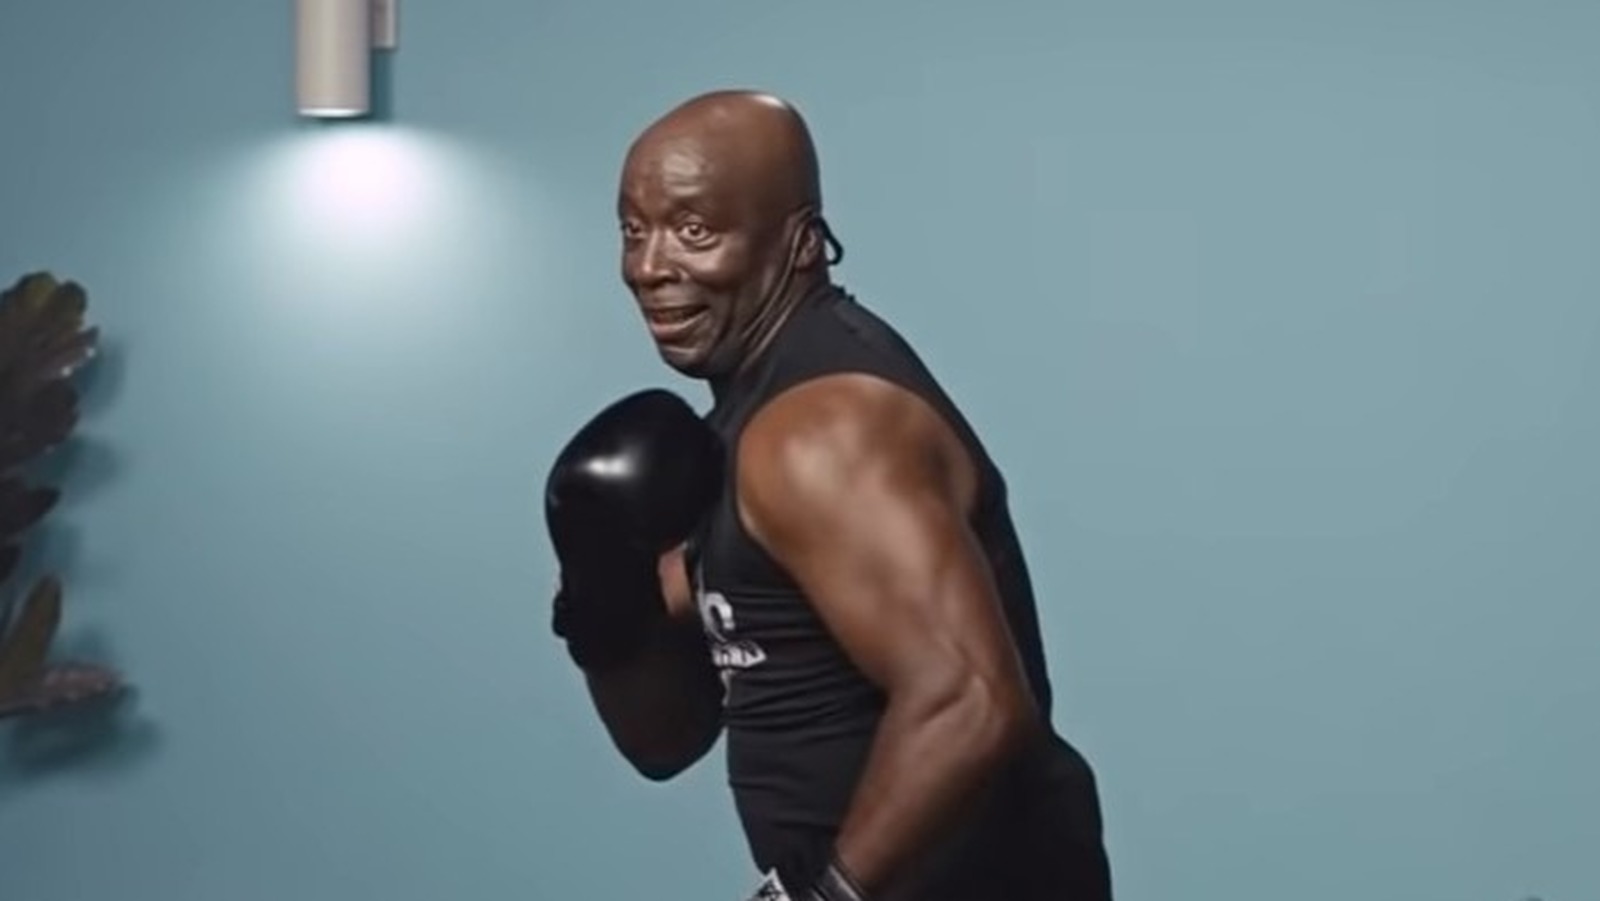 Who Is Billy Blanks From The Geico Claims Audition Commercial?